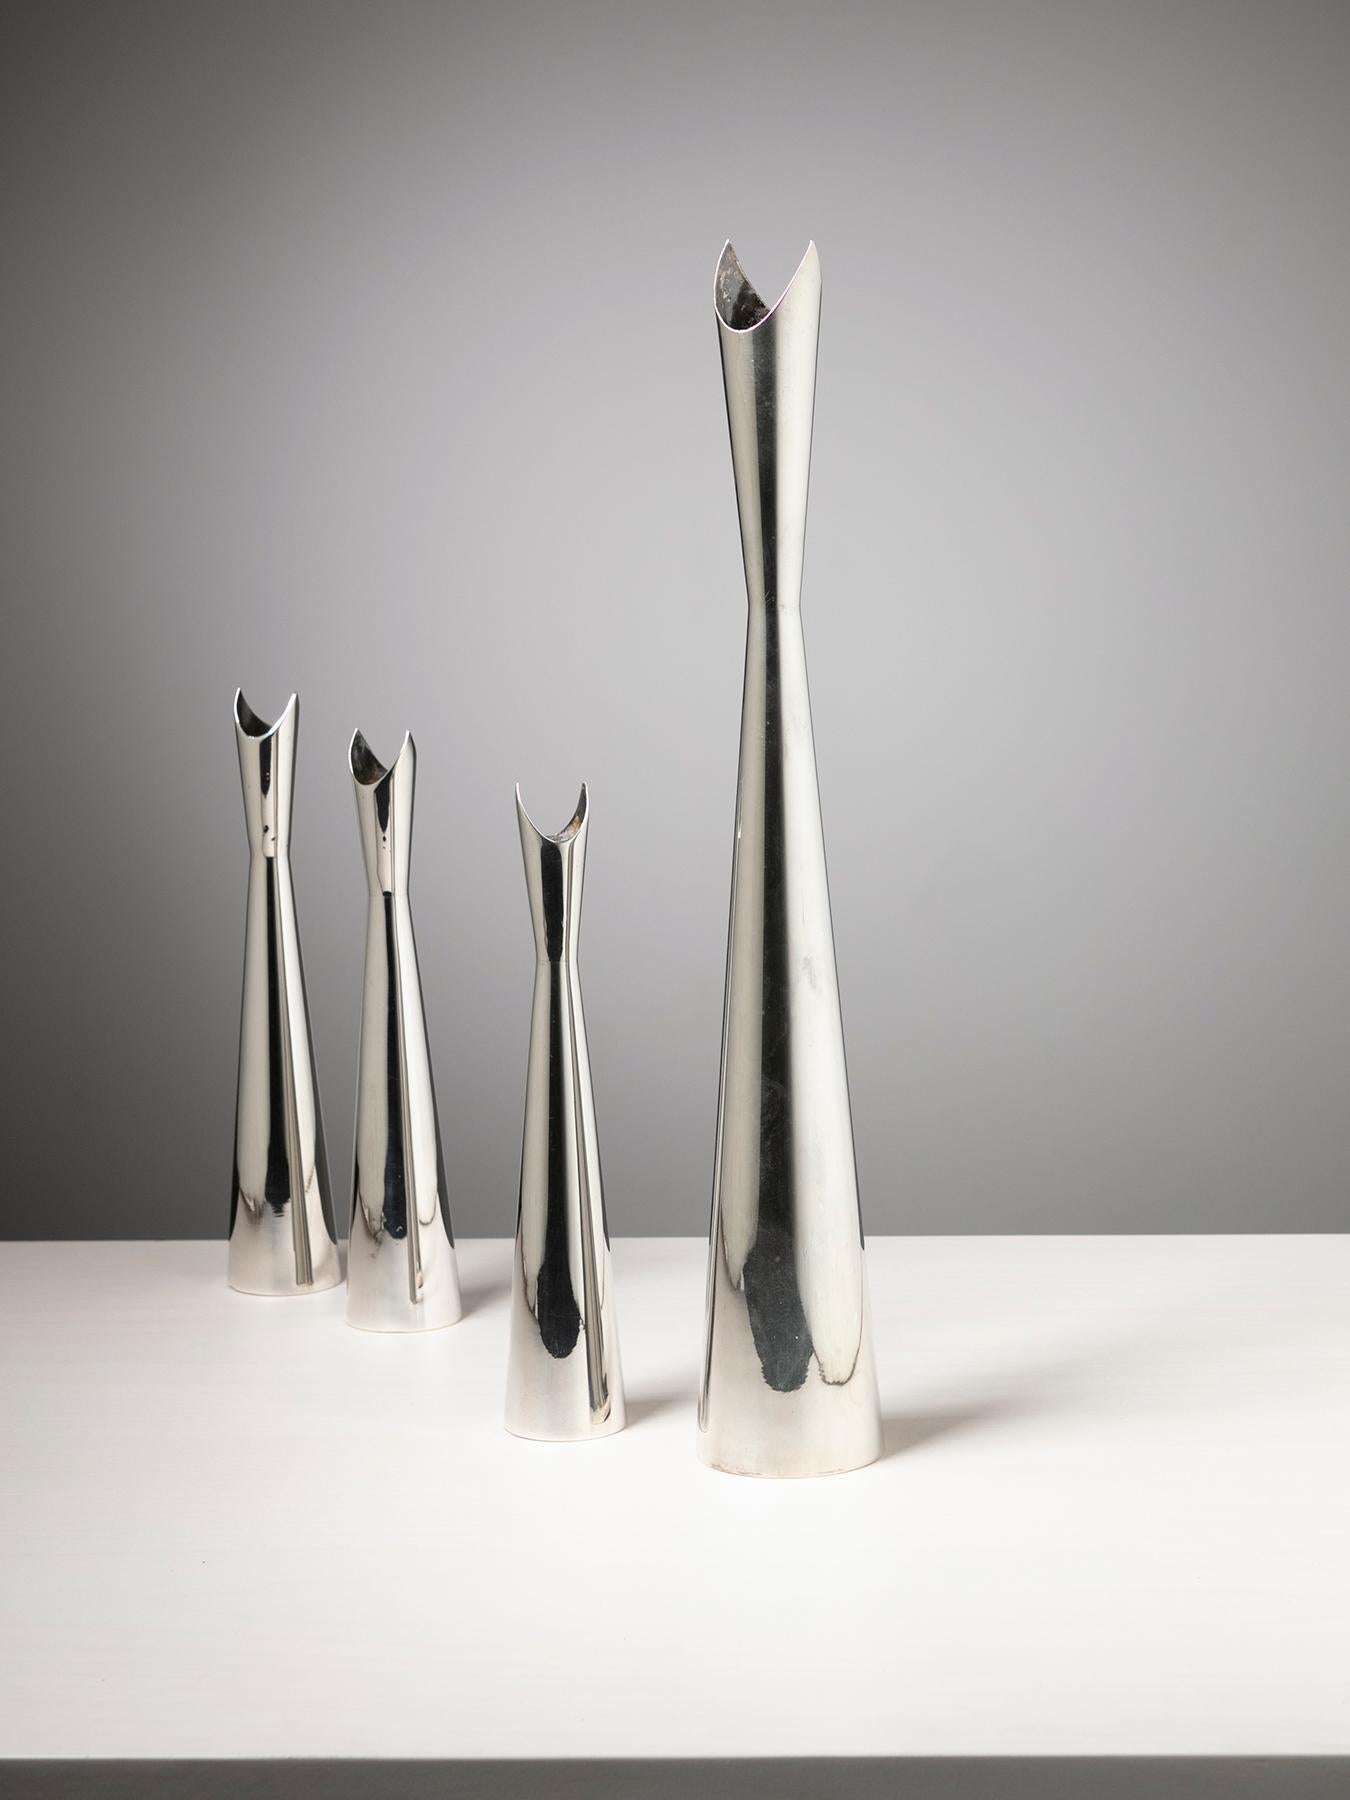 Set of four Cardinale vases by Lino Sabattini for Christofle, Paris.
Size refers to the tallest piece.
         